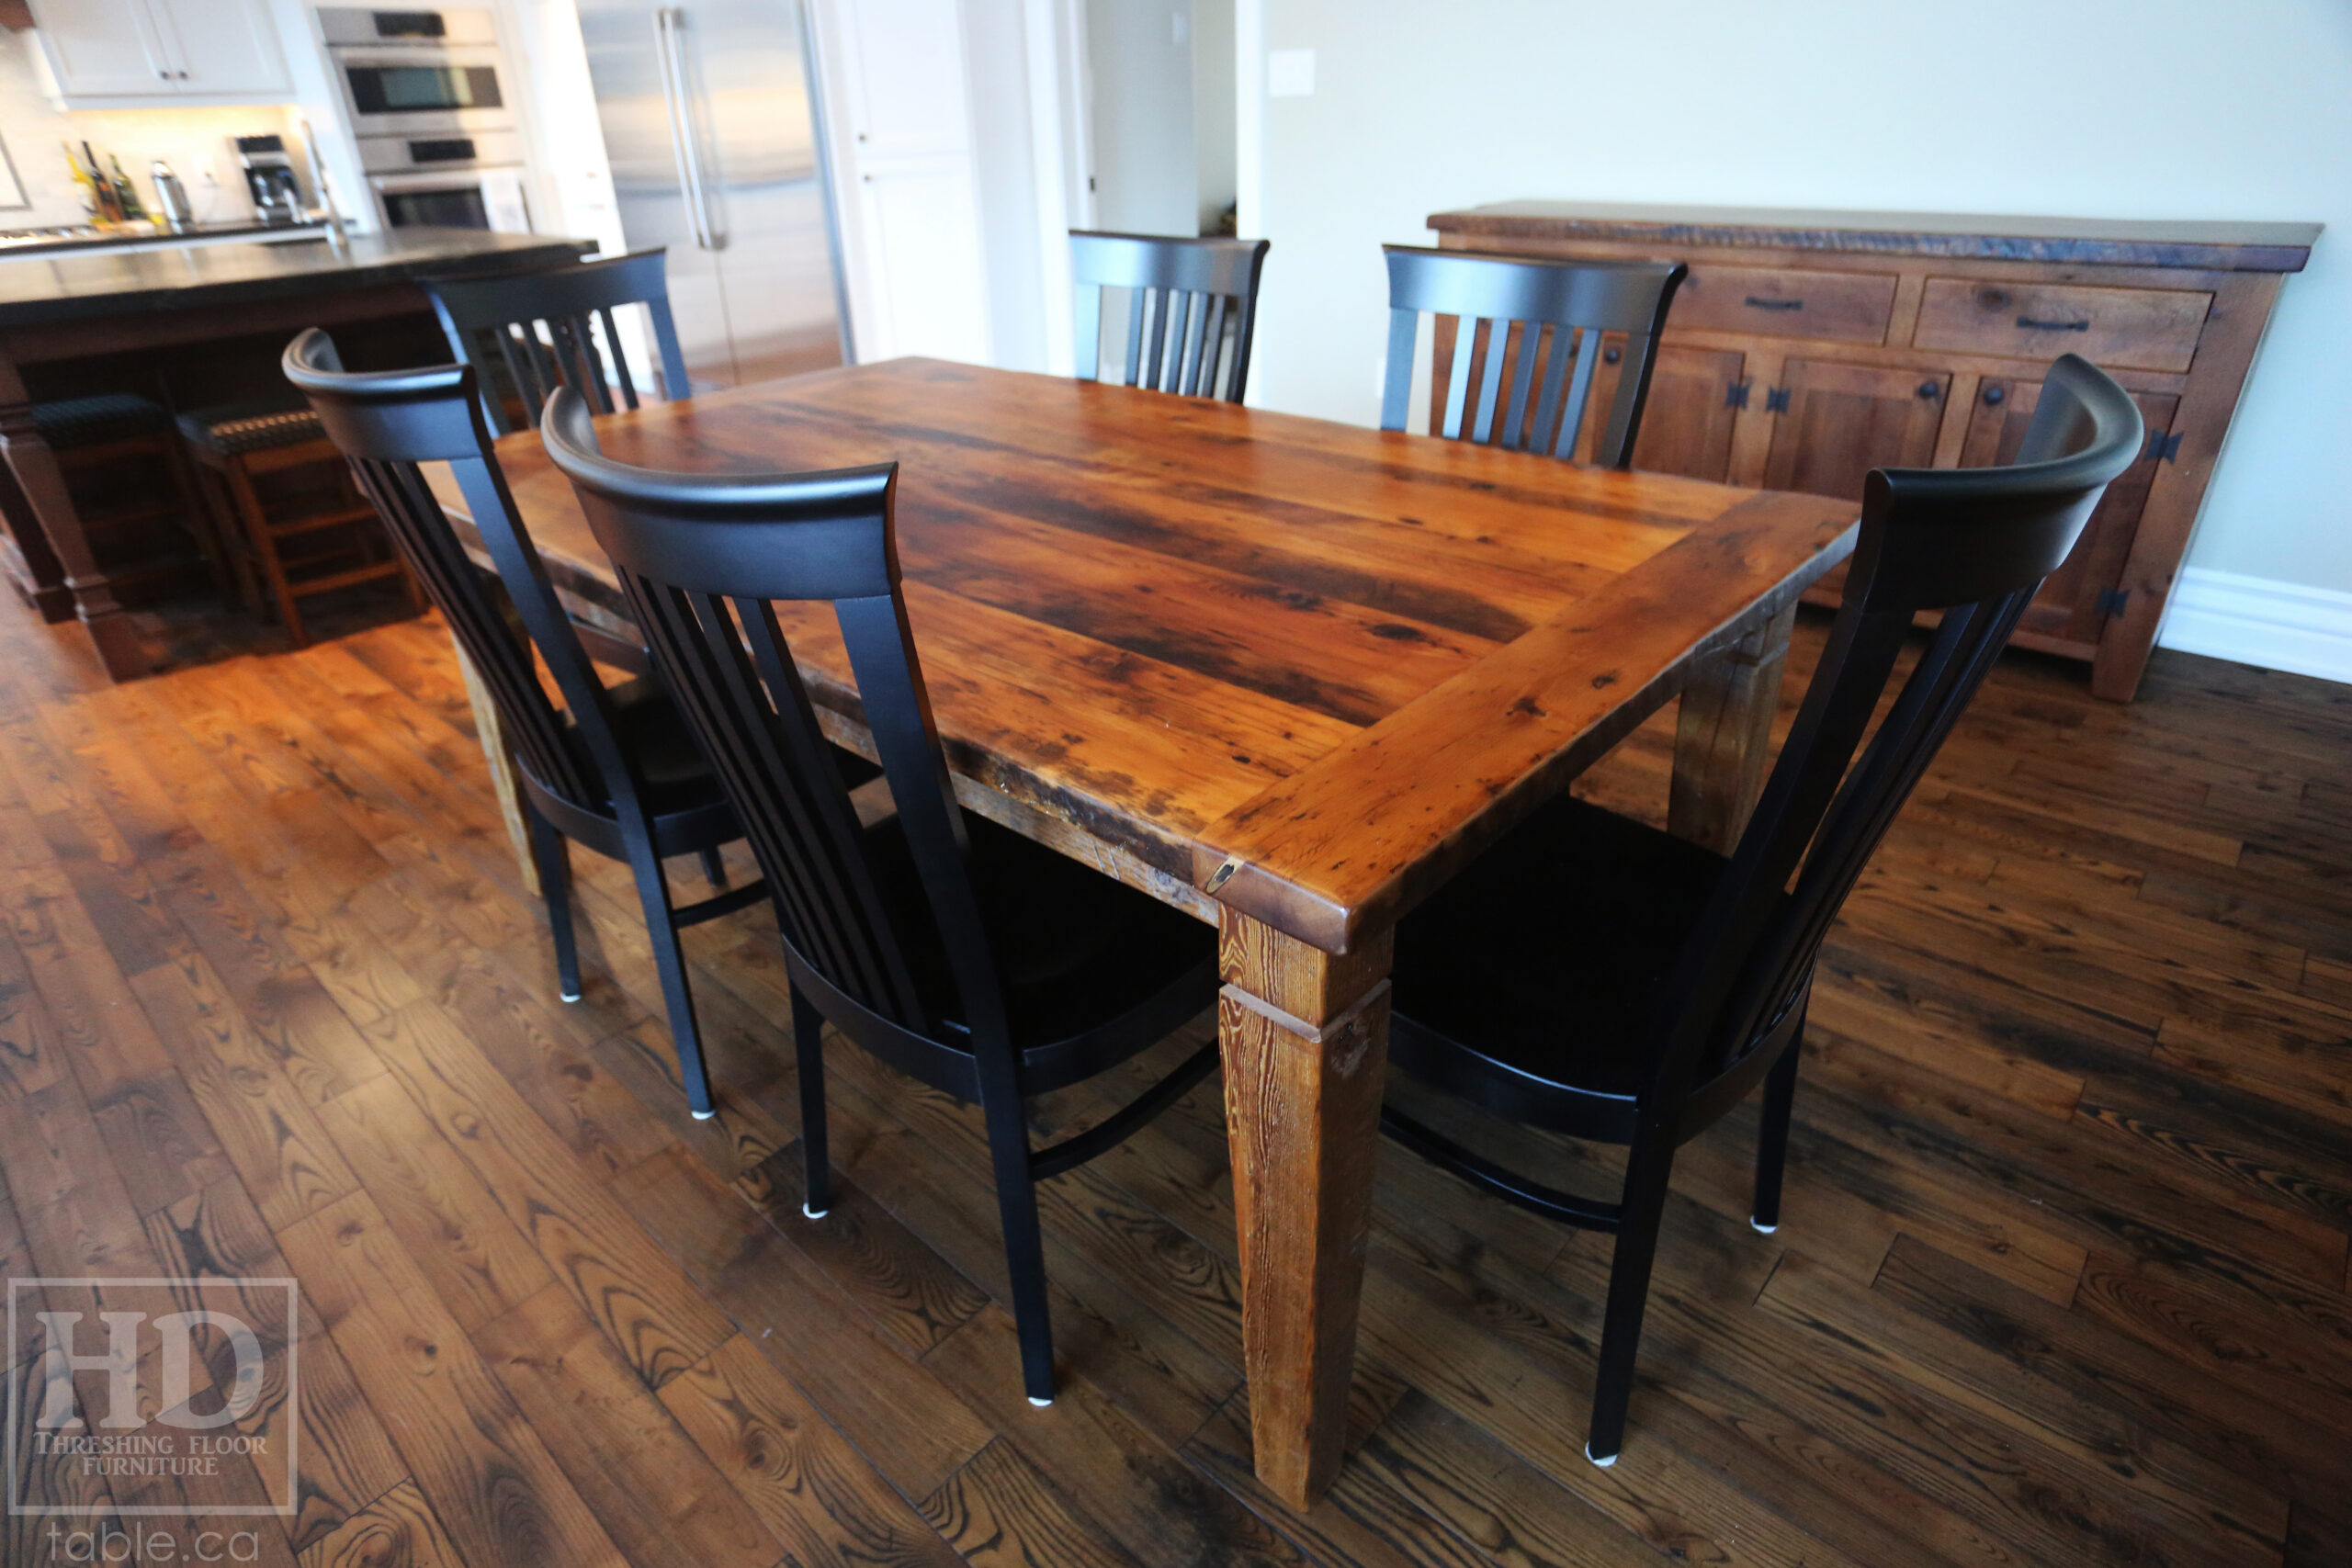 72" Reclaimed Ontario Barnwood Table we made for a St. George home - 42" deep - Harvest Base: Tapered Windbrace Beam Legs Option - Old Growth Hemlock Threshing Floor Construction - Original edges & distressing maintained - Premium epoxy + matte polyurethane finish - Two 18" Leaf Extensions [making total length 9' when extended] - 6 Athena Chairs / Wormy Maple / Painted Solid Black - www.table.ca